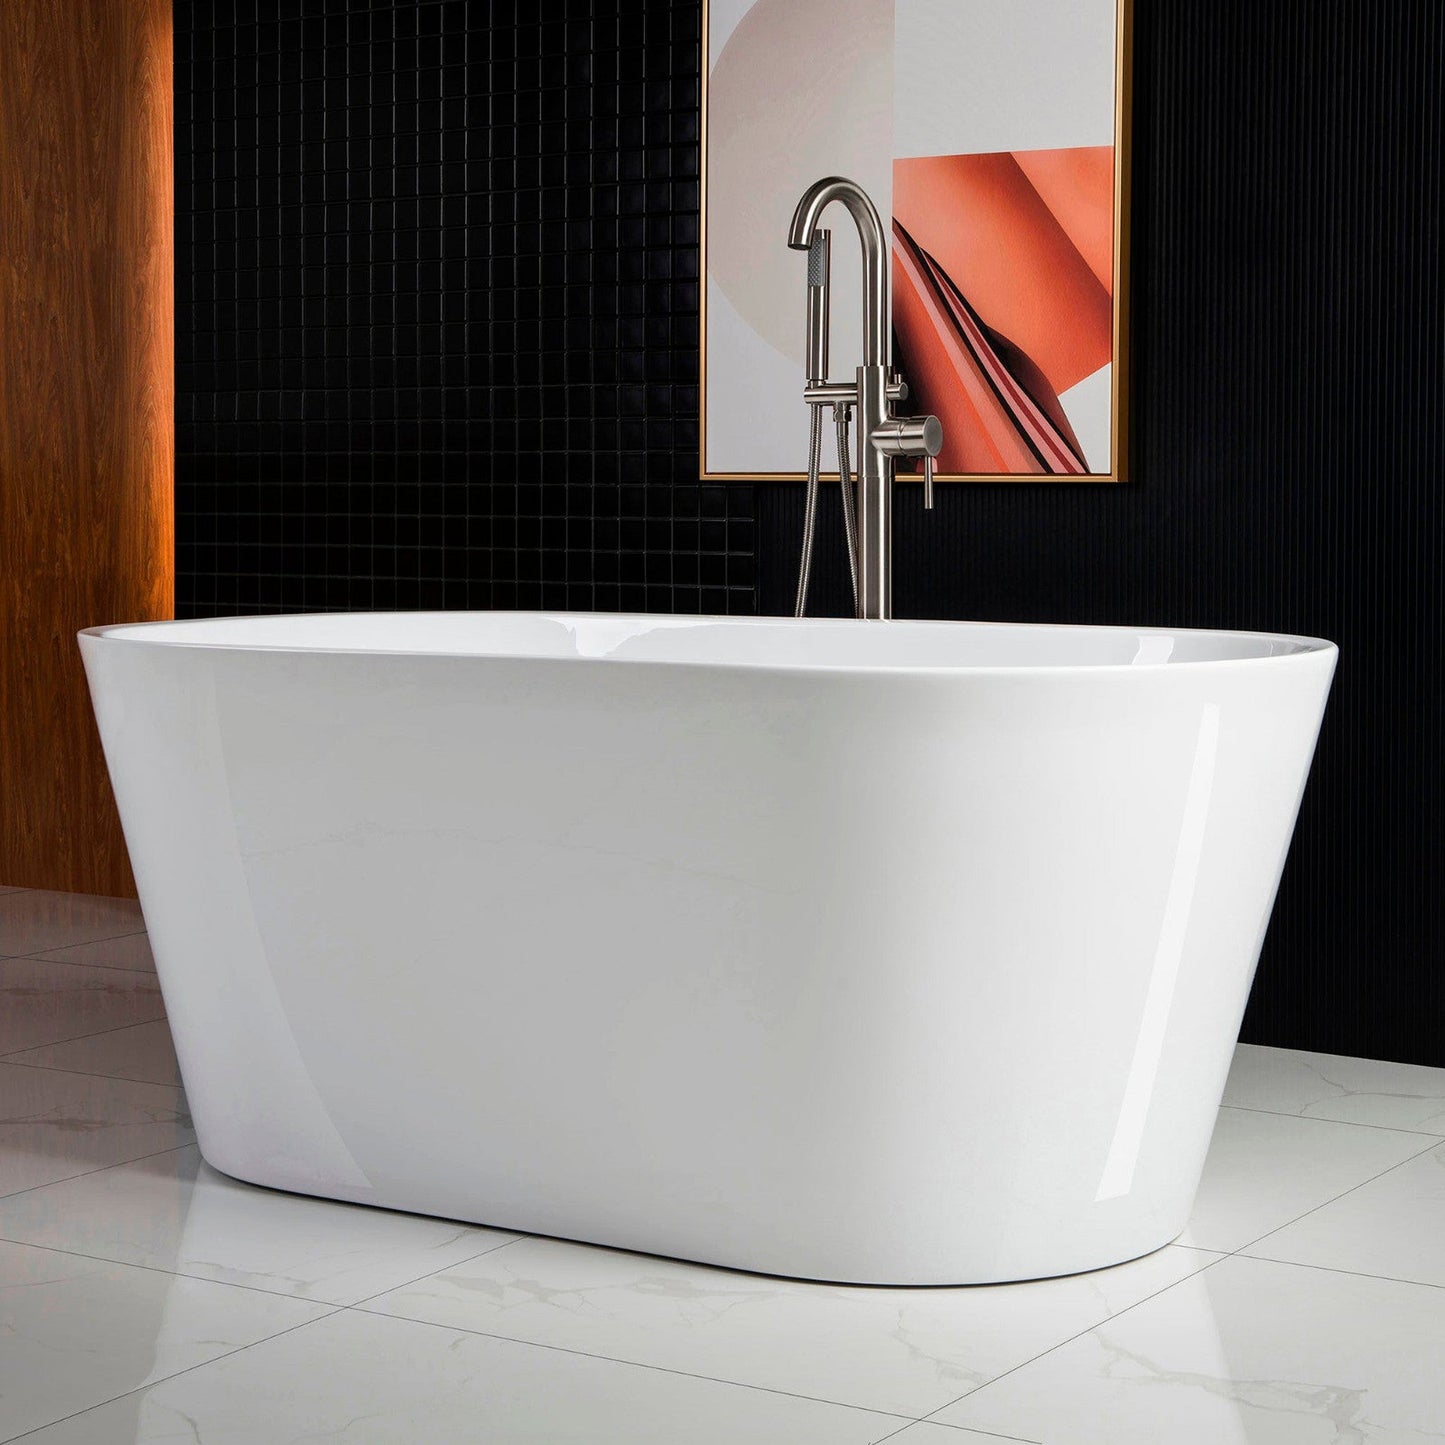 WoodBridge B0014 59" White Acrylic Freestanding Soaking Bathtub With Brushed Nickel Drain, Overflow, F0070BNVT Tub Filler and Caddy Tray